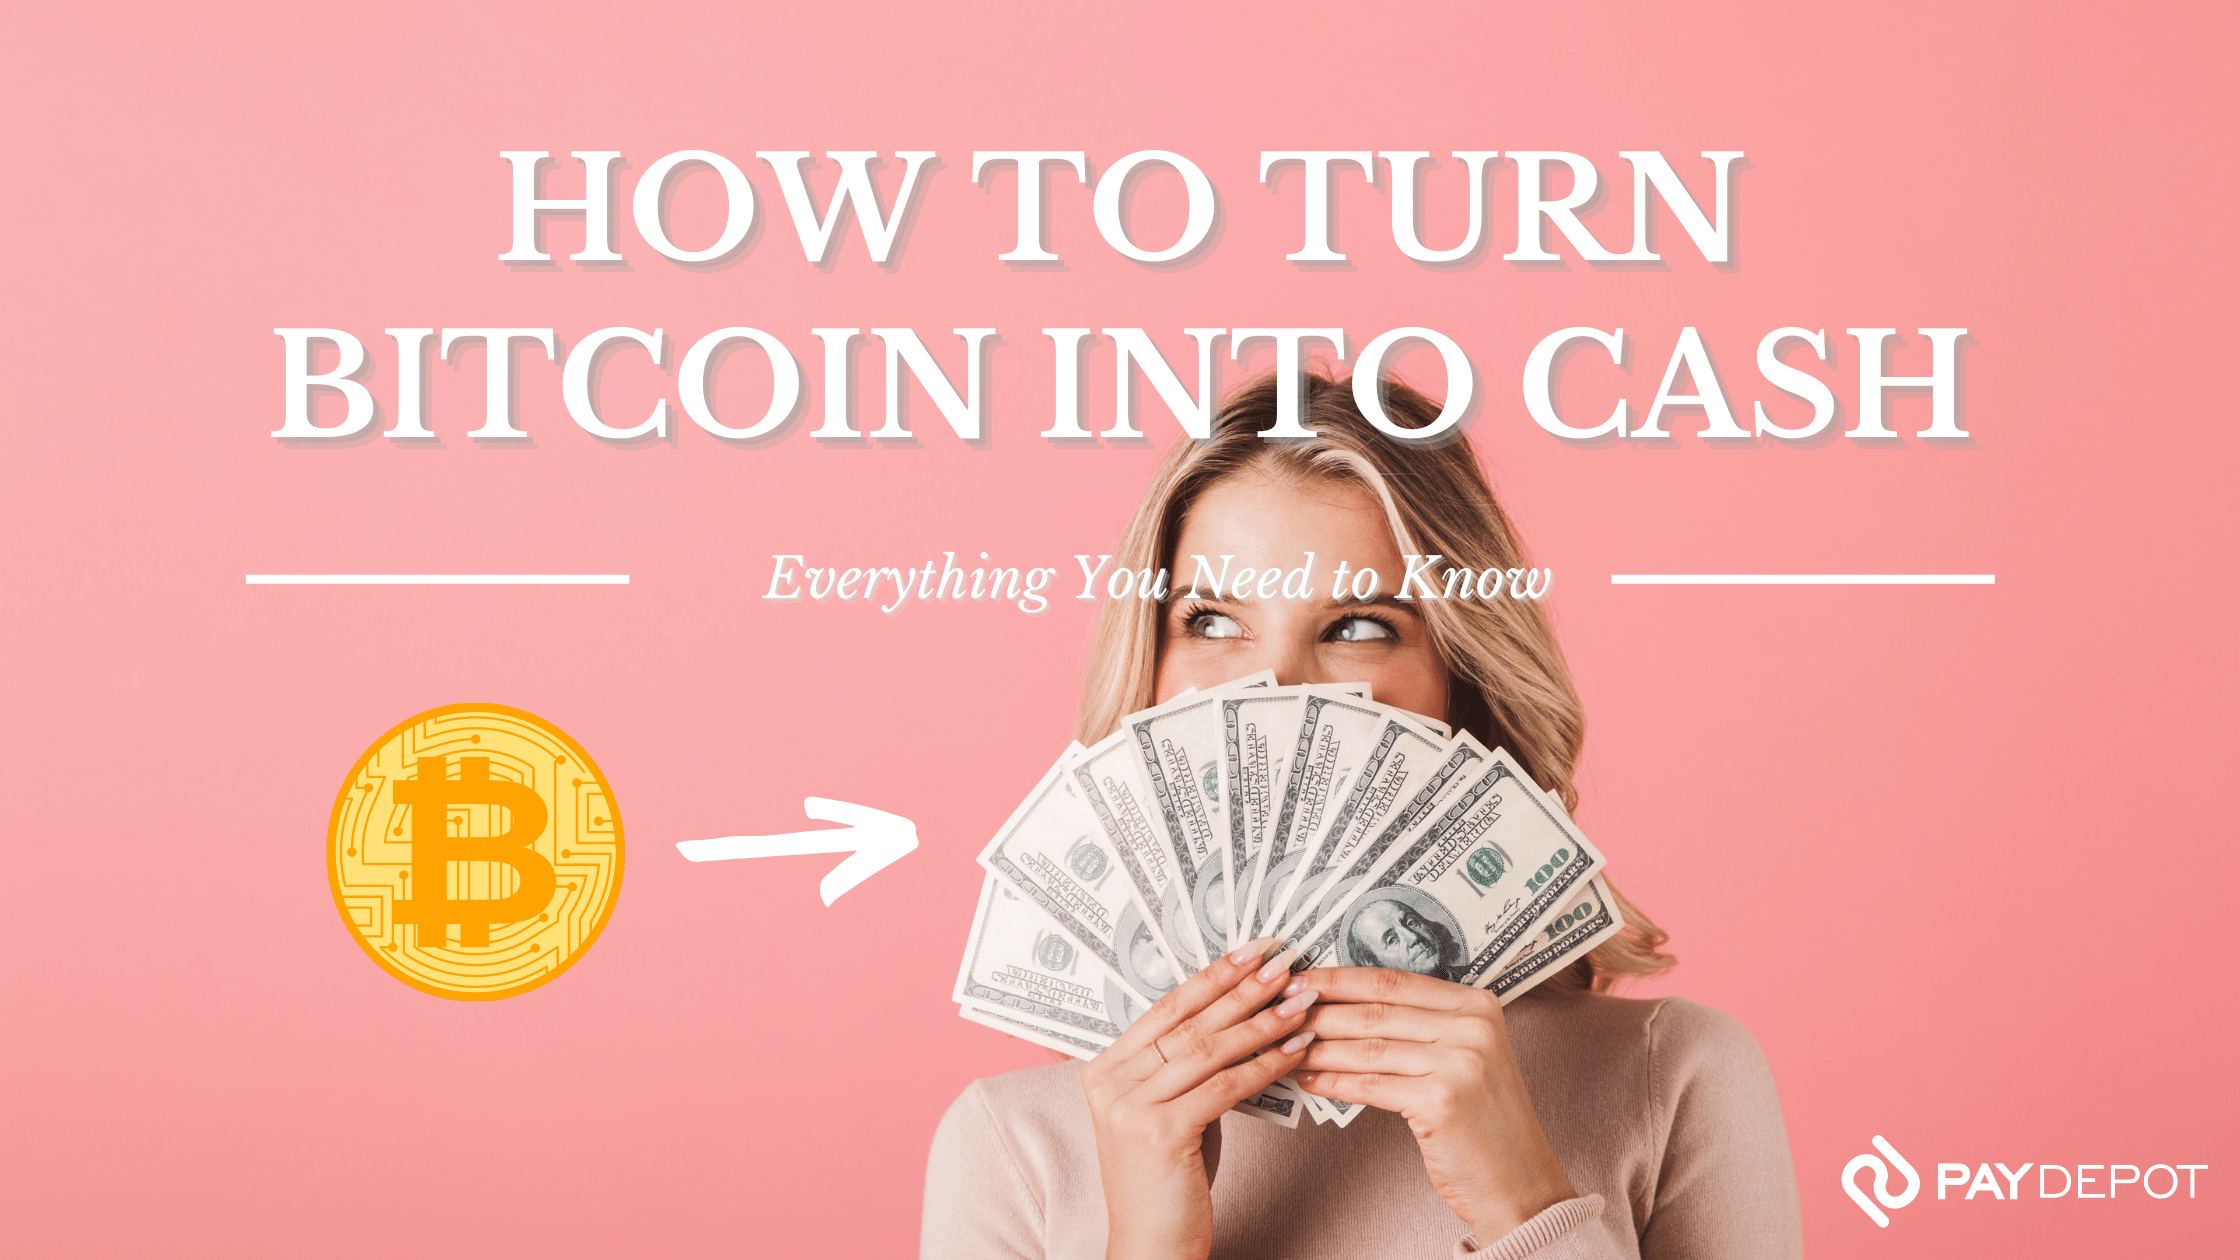 Guide | How to Withdraw Bitcoin